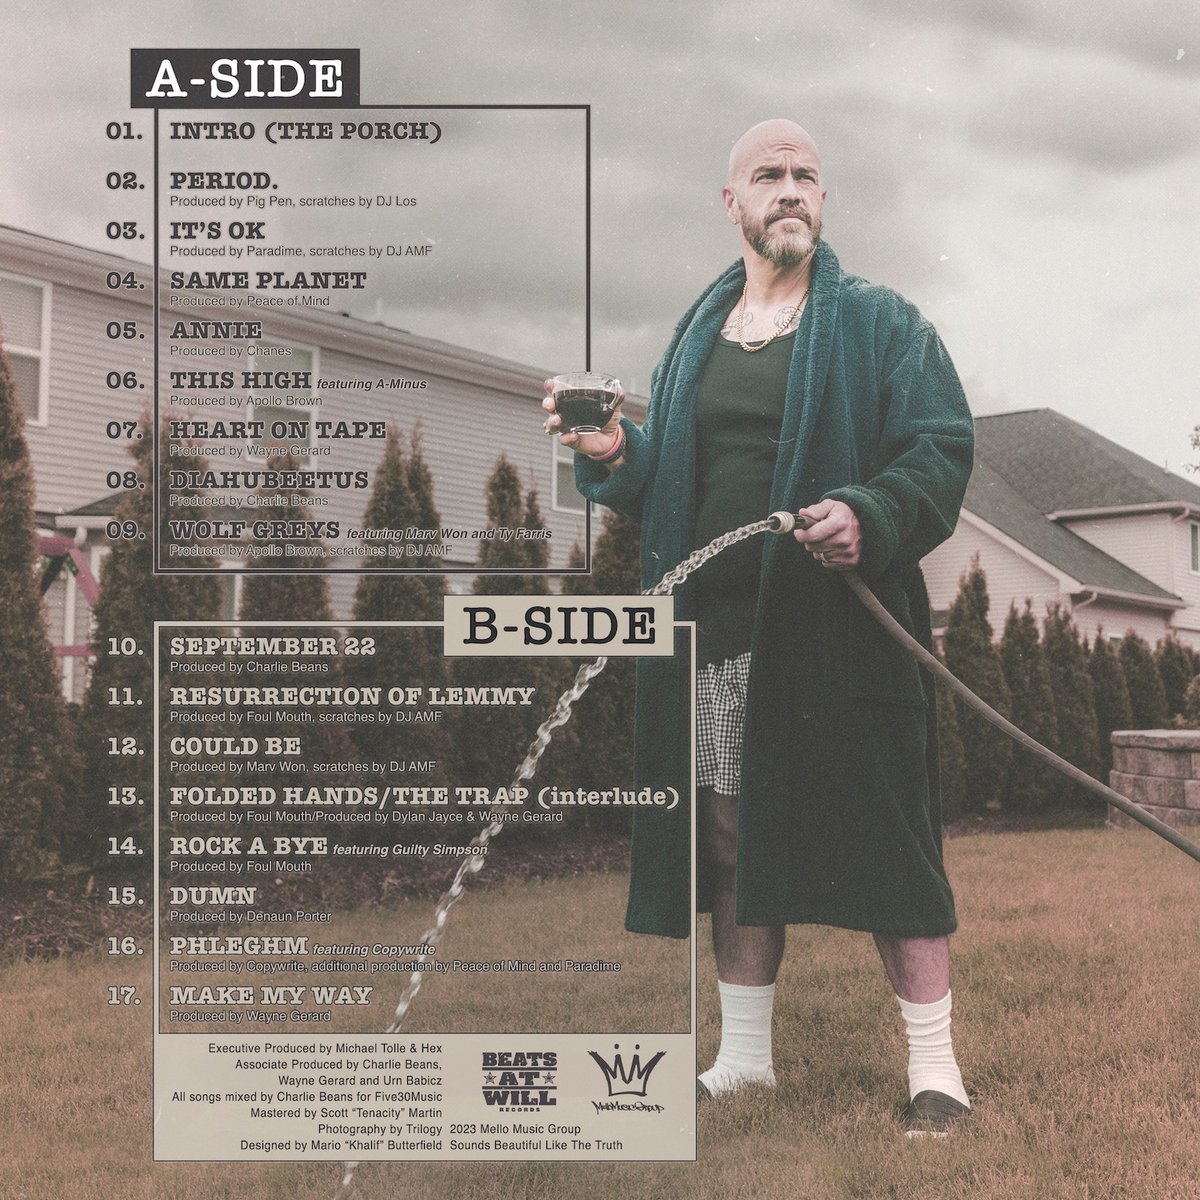 New album: @Paradime “period.” ow.ly/NmhZ50PWHJS Legacy, love & struggle. Features include @guiltysimpson @marvwon, @tyfarris1, @apollobrown, @mRpOrTeR7, Copywrite, Wayne Gerard, and Charlie Beans. Executive produced by @ironsidehex ⬛🟢 ow.ly/x28K50PWHJR